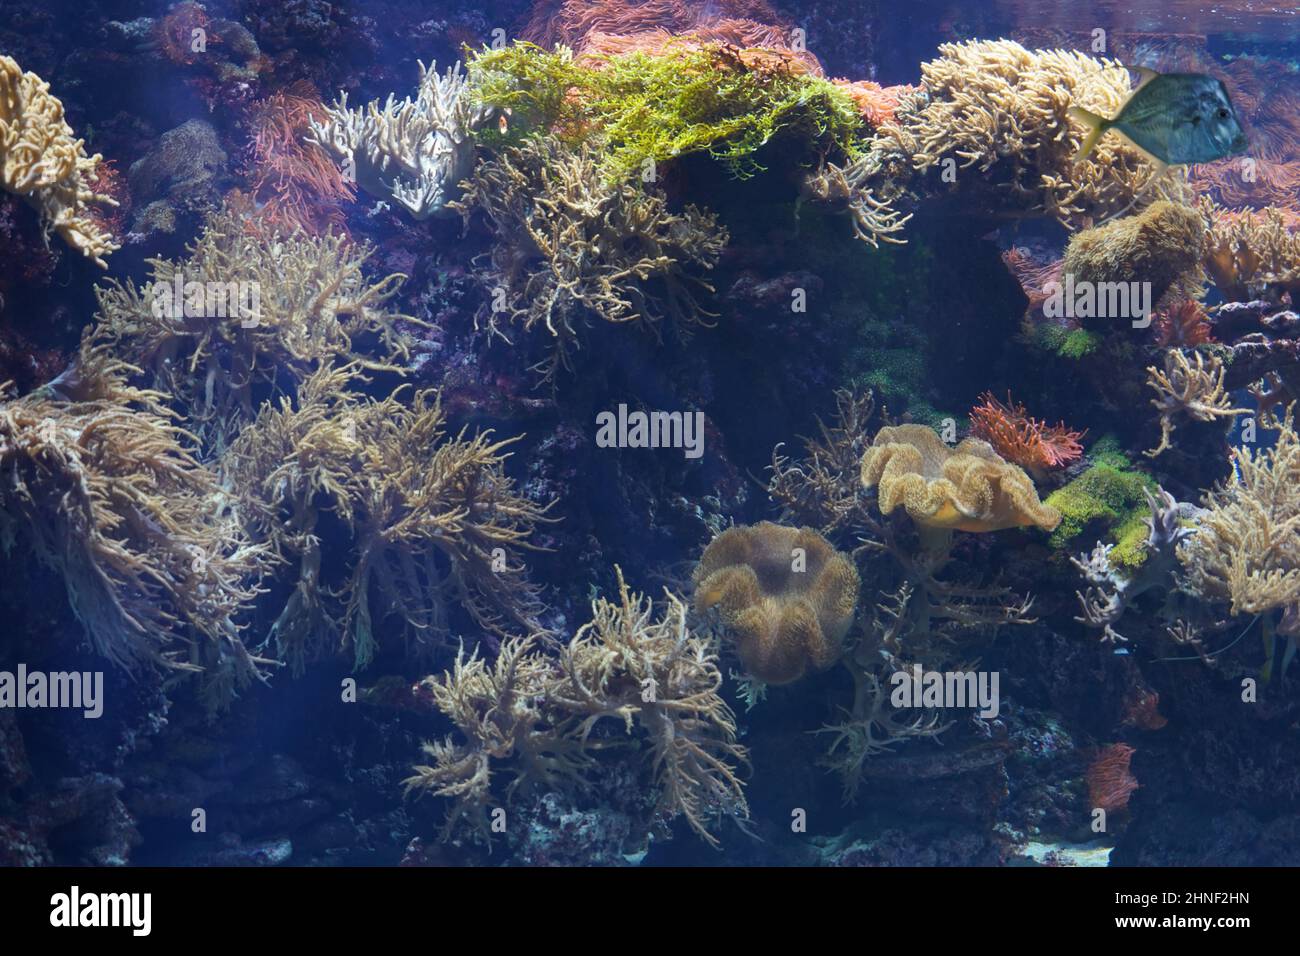 Underwater sea life. Tropical coral reef background. Copy space is available. Stock Photo